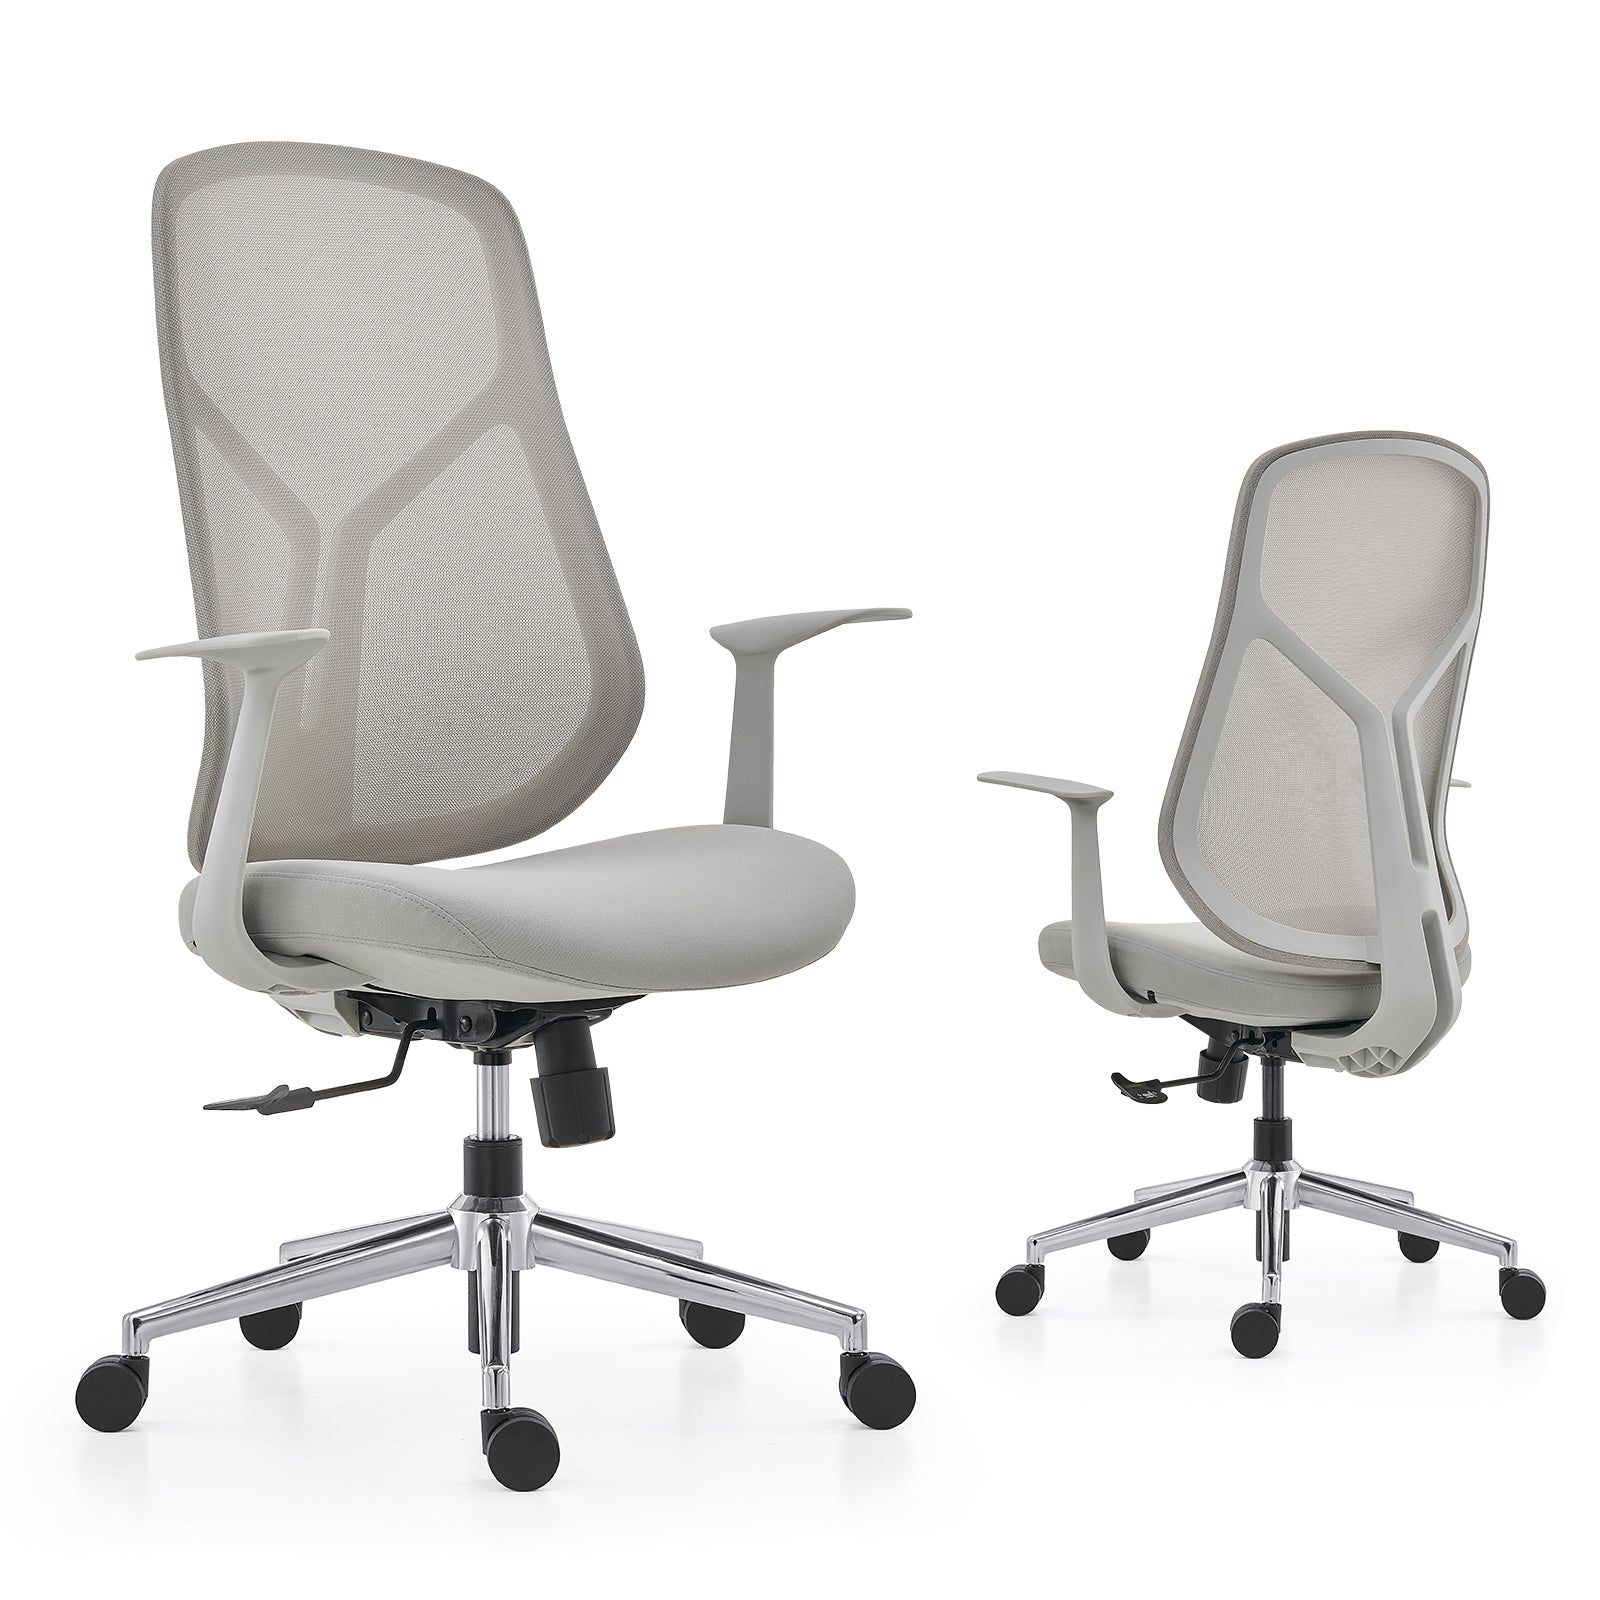 VOFFOV Ergonomic Chair Big And Tall Office Chair